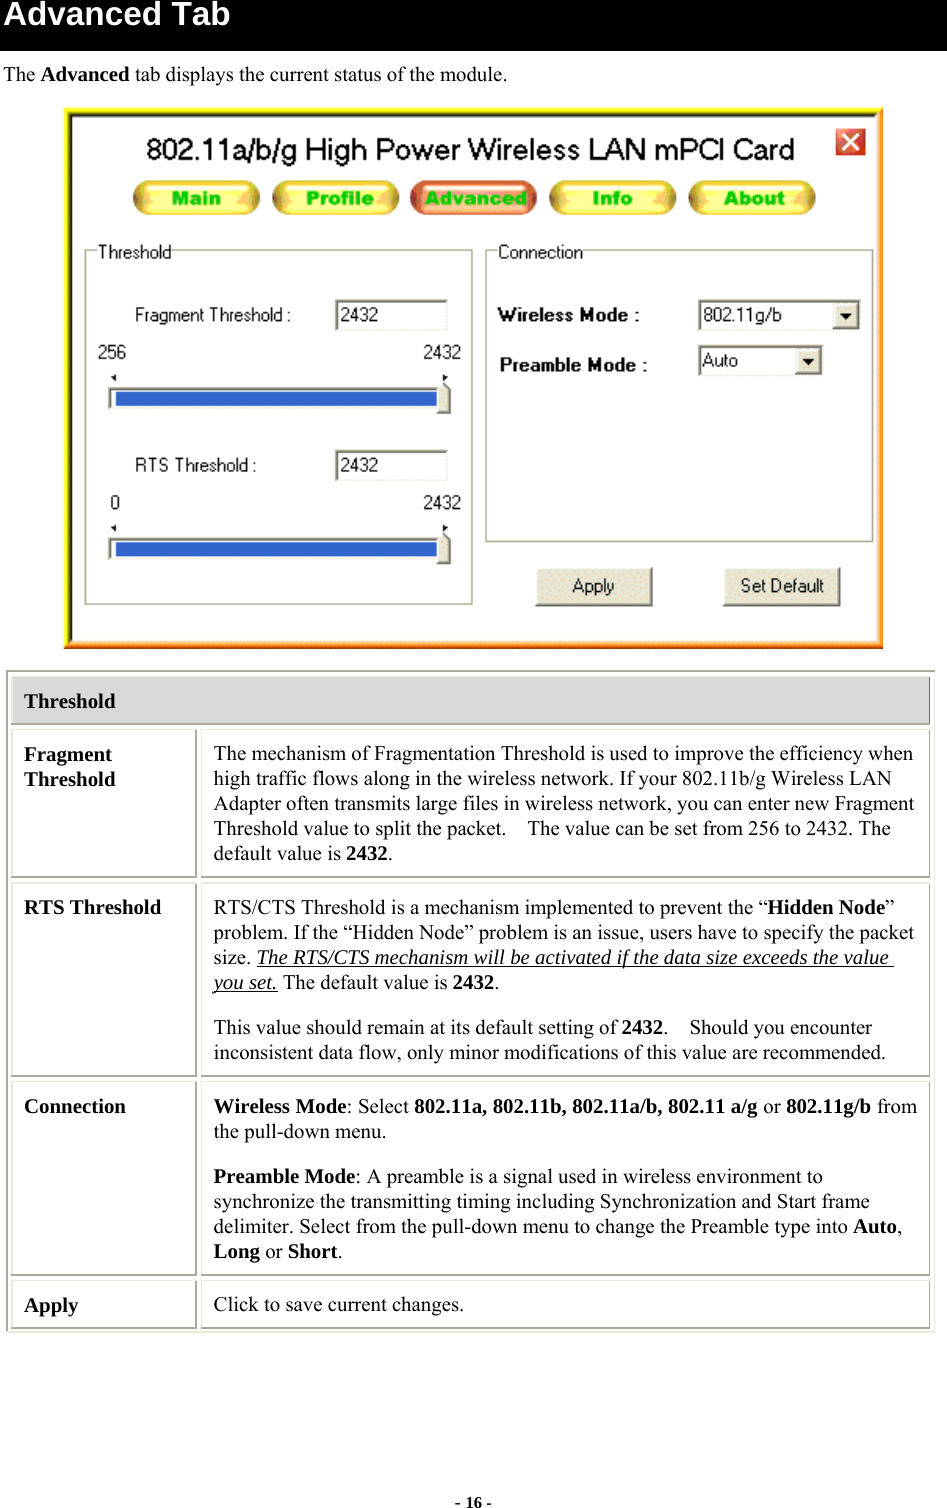 - 16 - Advanced Tab The Advanced tab displays the current status of the module.  Threshold Fragment Threshold The mechanism of Fragmentation Threshold is used to improve the efficiency when high traffic flows along in the wireless network. If your 802.11b/g Wireless LAN Adapter often transmits large files in wireless network, you can enter new Fragment Threshold value to split the packet.    The value can be set from 256 to 2432. The default value is 2432. RTS Threshold  RTS/CTS Threshold is a mechanism implemented to prevent the “Hidden Node” problem. If the “Hidden Node” problem is an issue, users have to specify the packet size. The RTS/CTS mechanism will be activated if the data size exceeds the value you set. The default value is 2432.  This value should remain at its default setting of 2432.    Should you encounter inconsistent data flow, only minor modifications of this value are recommended. Connection  Wireless Mode: Select 802.11a, 802.11b, 802.11a/b, 802.11 a/g or 802.11g/b from the pull-down menu. Preamble Mode: A preamble is a signal used in wireless environment to synchronize the transmitting timing including Synchronization and Start frame delimiter. Select from the pull-down menu to change the Preamble type into Auto, Long or Short. Apply  Click to save current changes. 